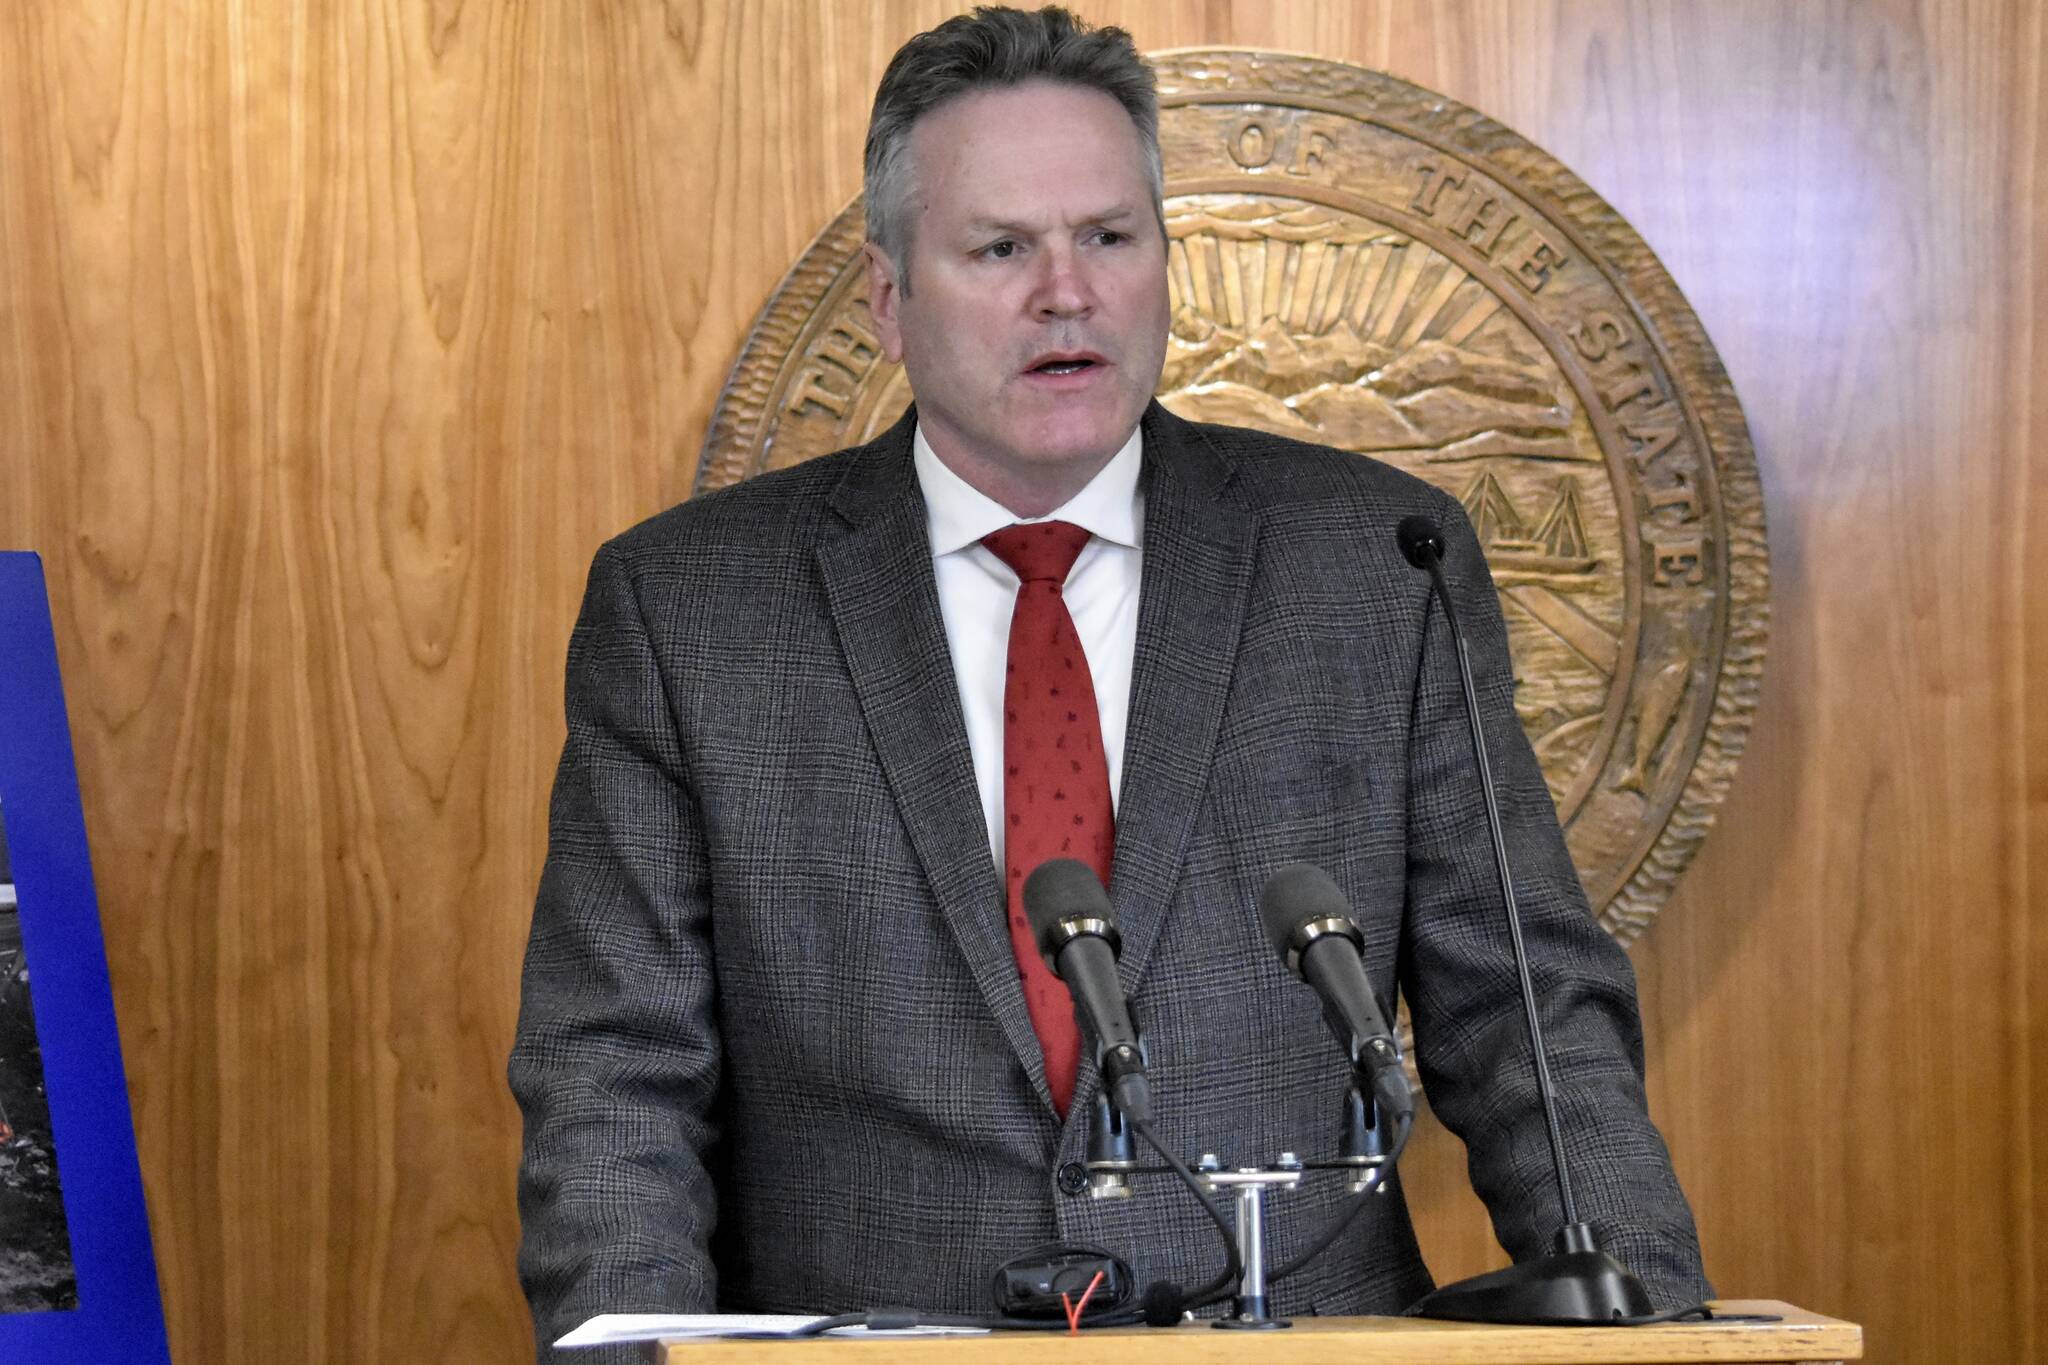 Peter Segall / Juneau Empire file 
Gov. Mike Dunleavy — seen here speaking with reporters in the Cabinet Room at the Alaska State Capitol on March 8, 2022 — spoke to the Empire recently about his approach to government after having served as Alaska’s chief executive.